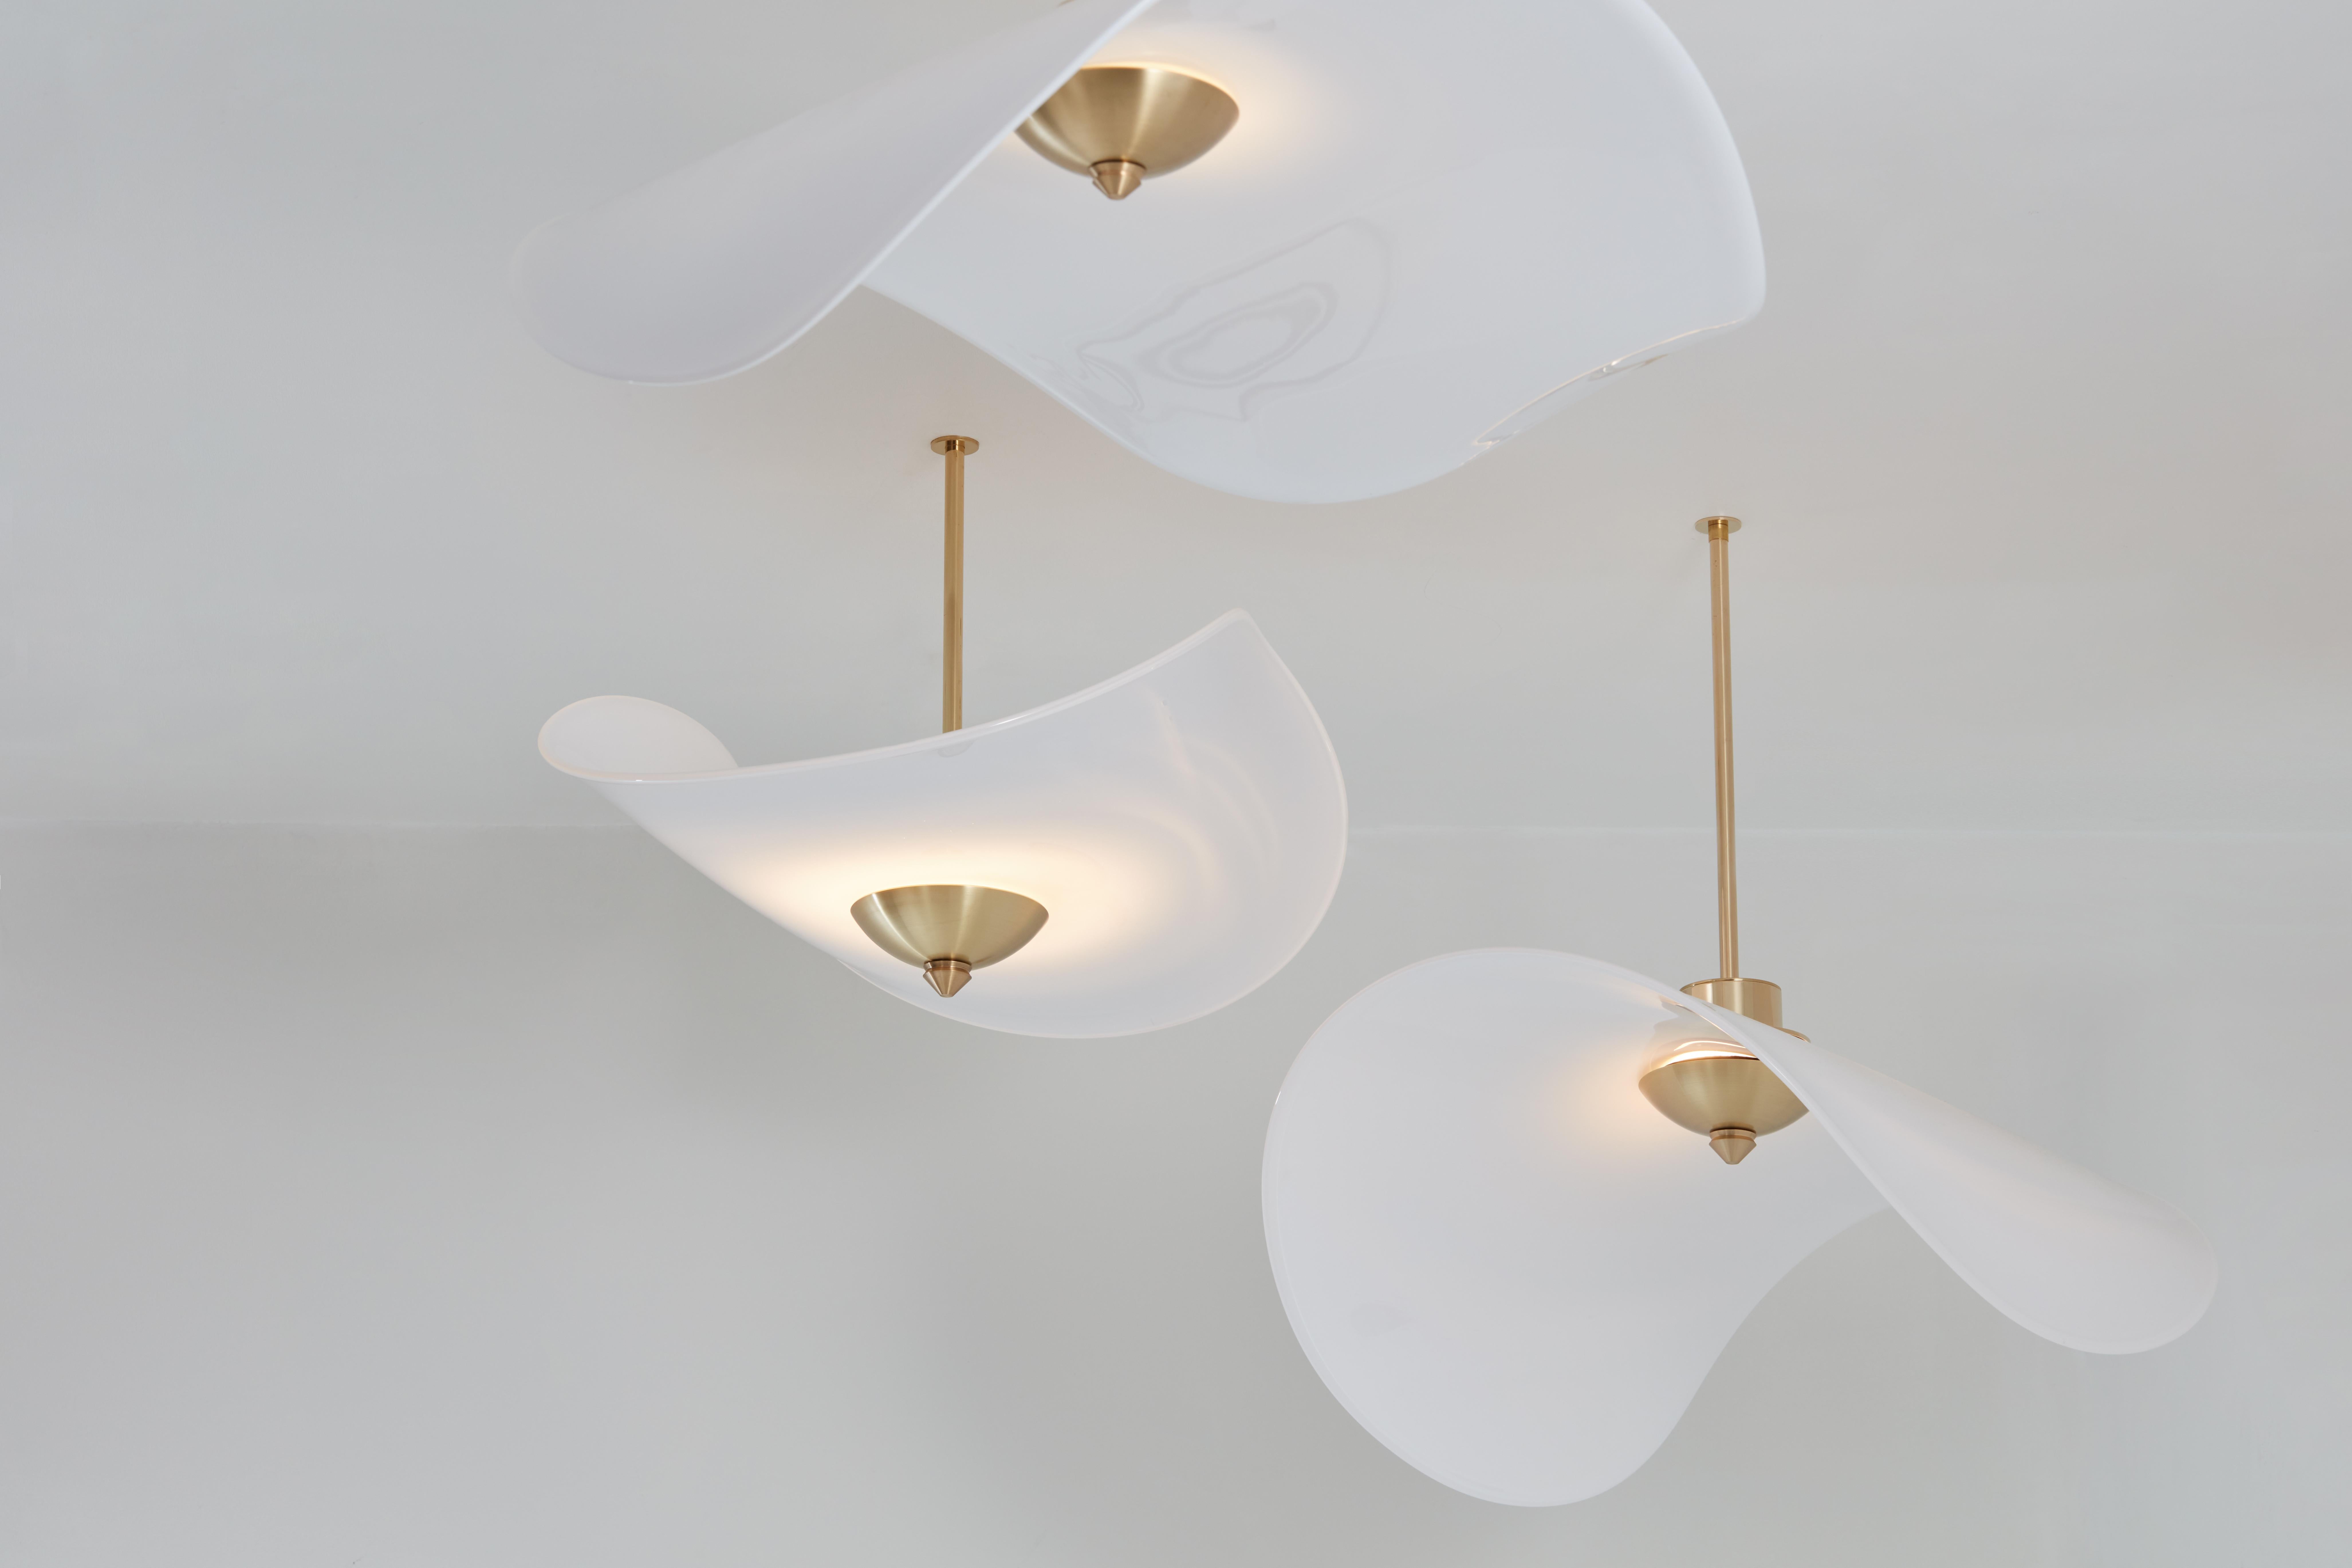 Envoleé glass pendant lamp by Mydriaz
Dimensions: D 45 x W 59 x H 11.5 cm
Materials: Opaline glass, pale gold polished brass.
10kg

Our products are handmade in our workshop. Dimensions and finishes may vary slightly from one model to another